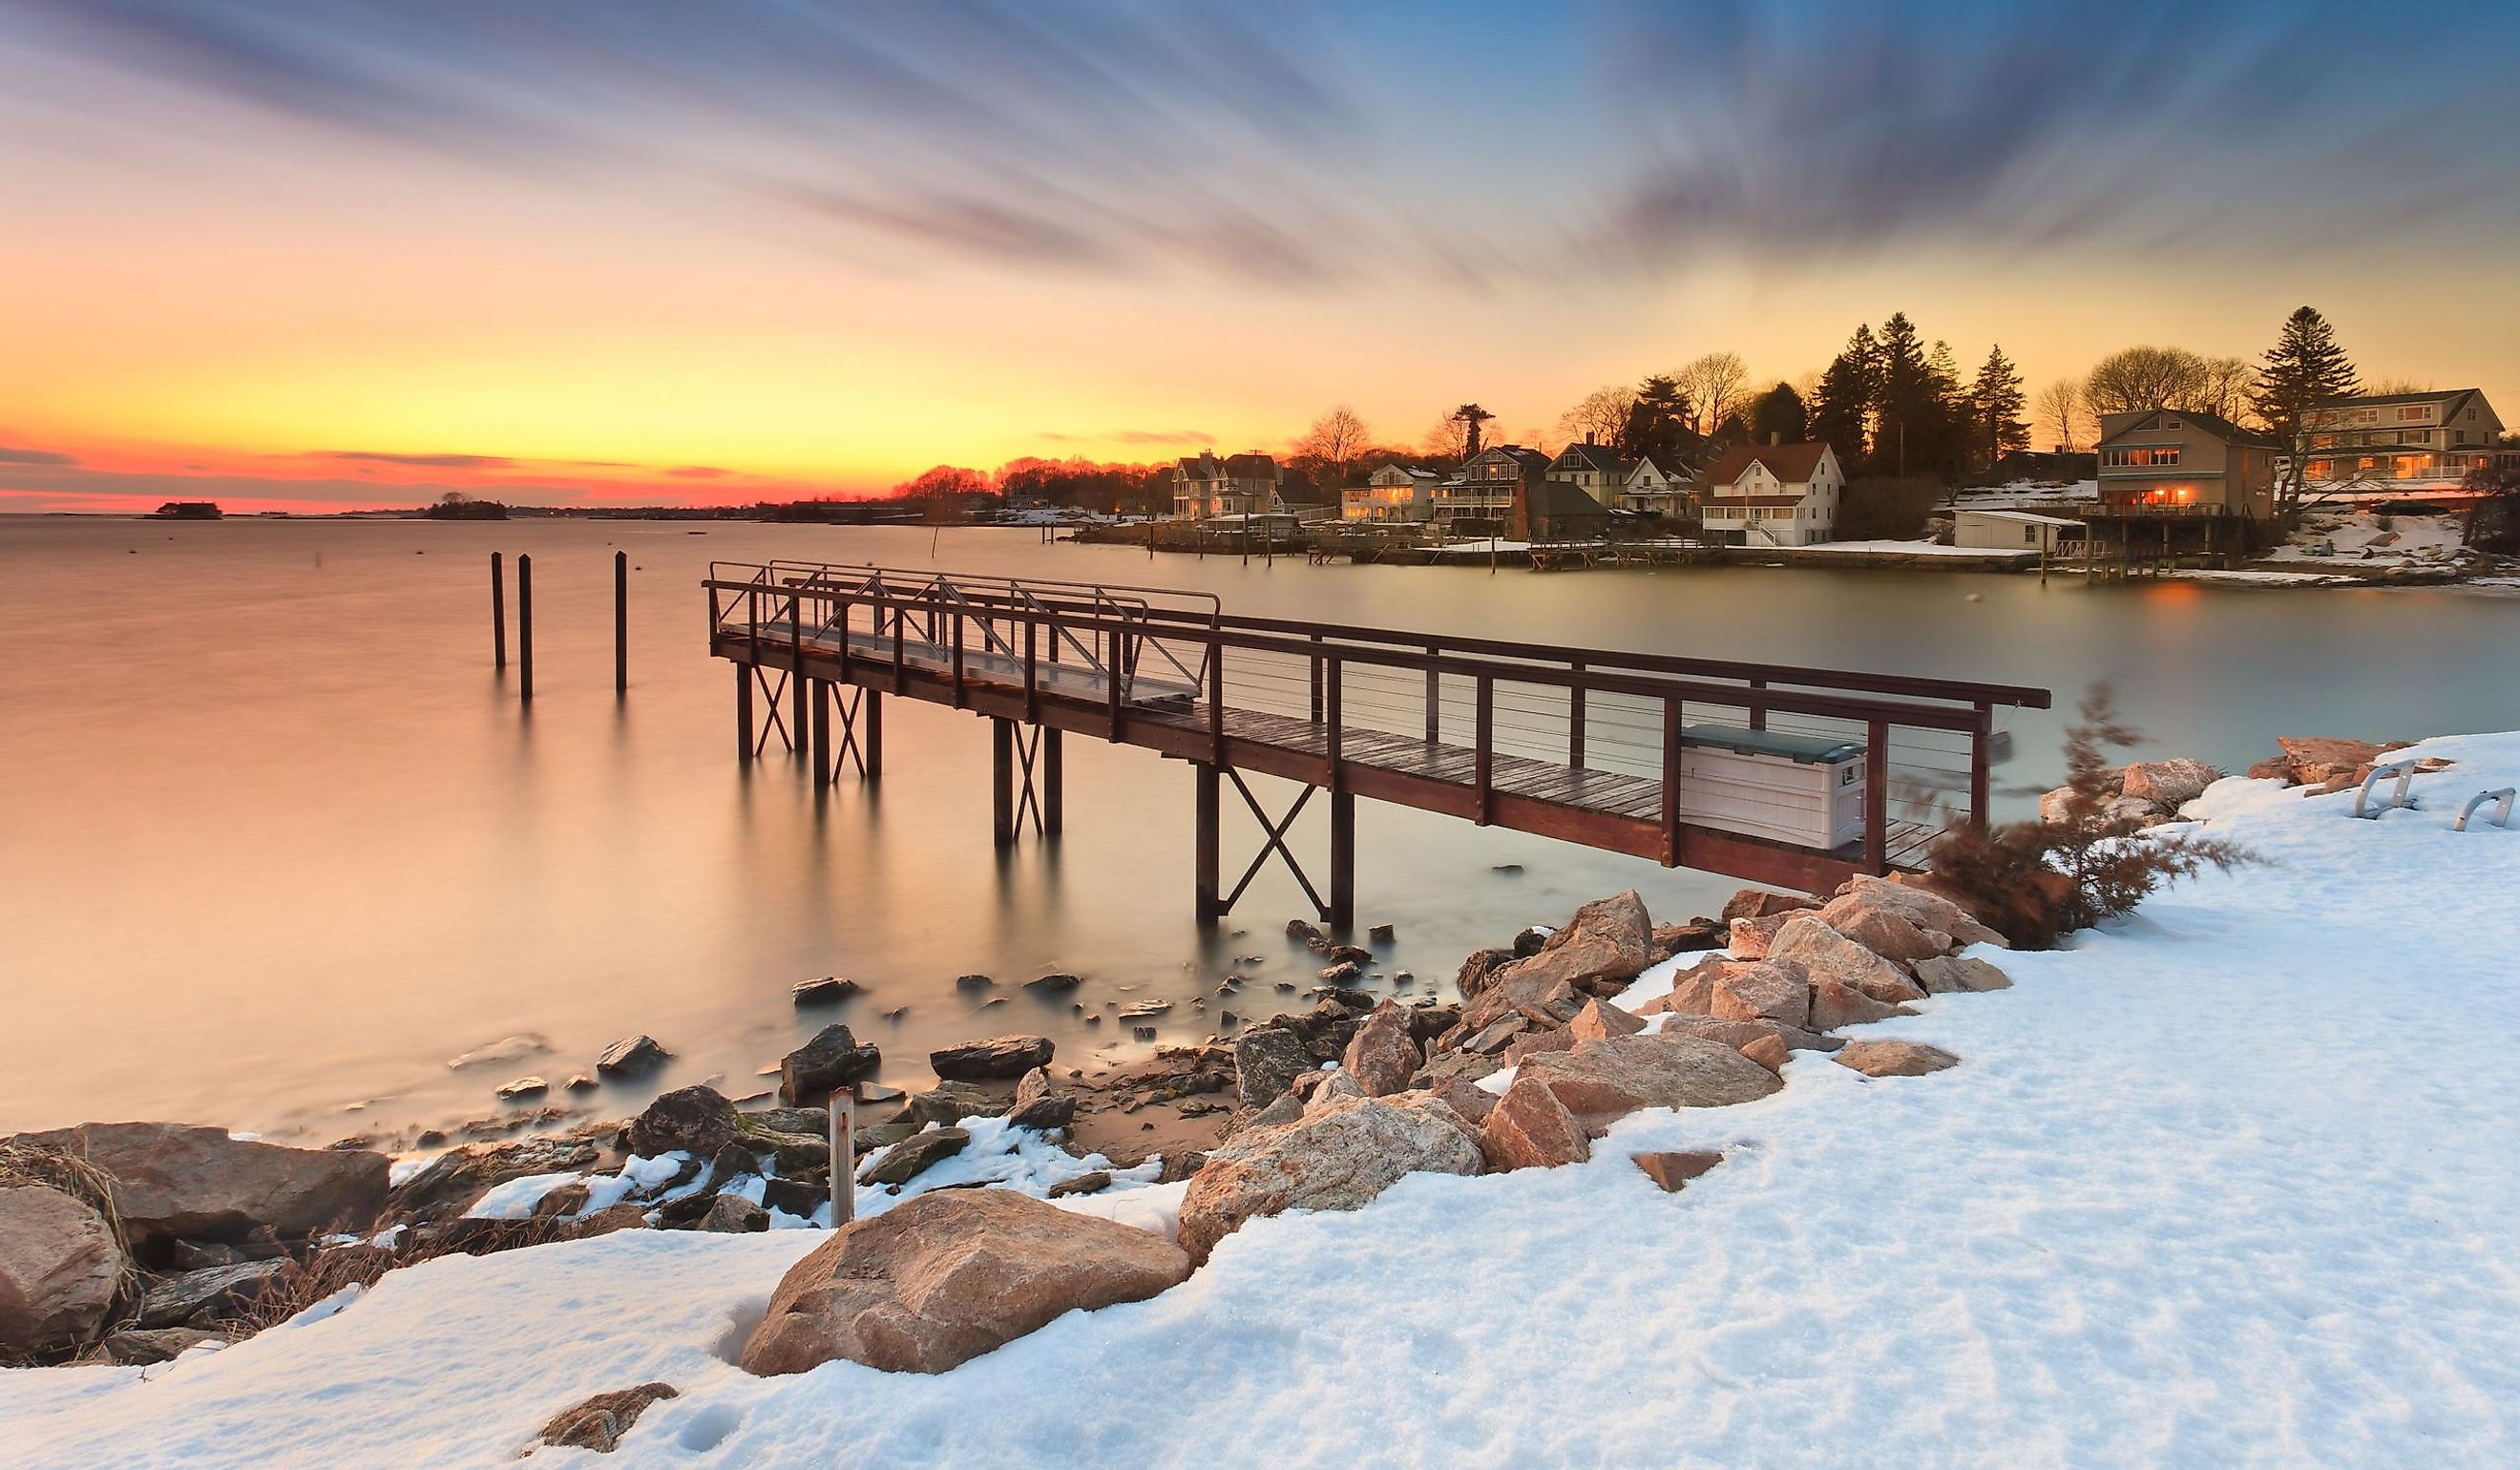 Dusk at the Pier in winter, Brandford, Connecticut.